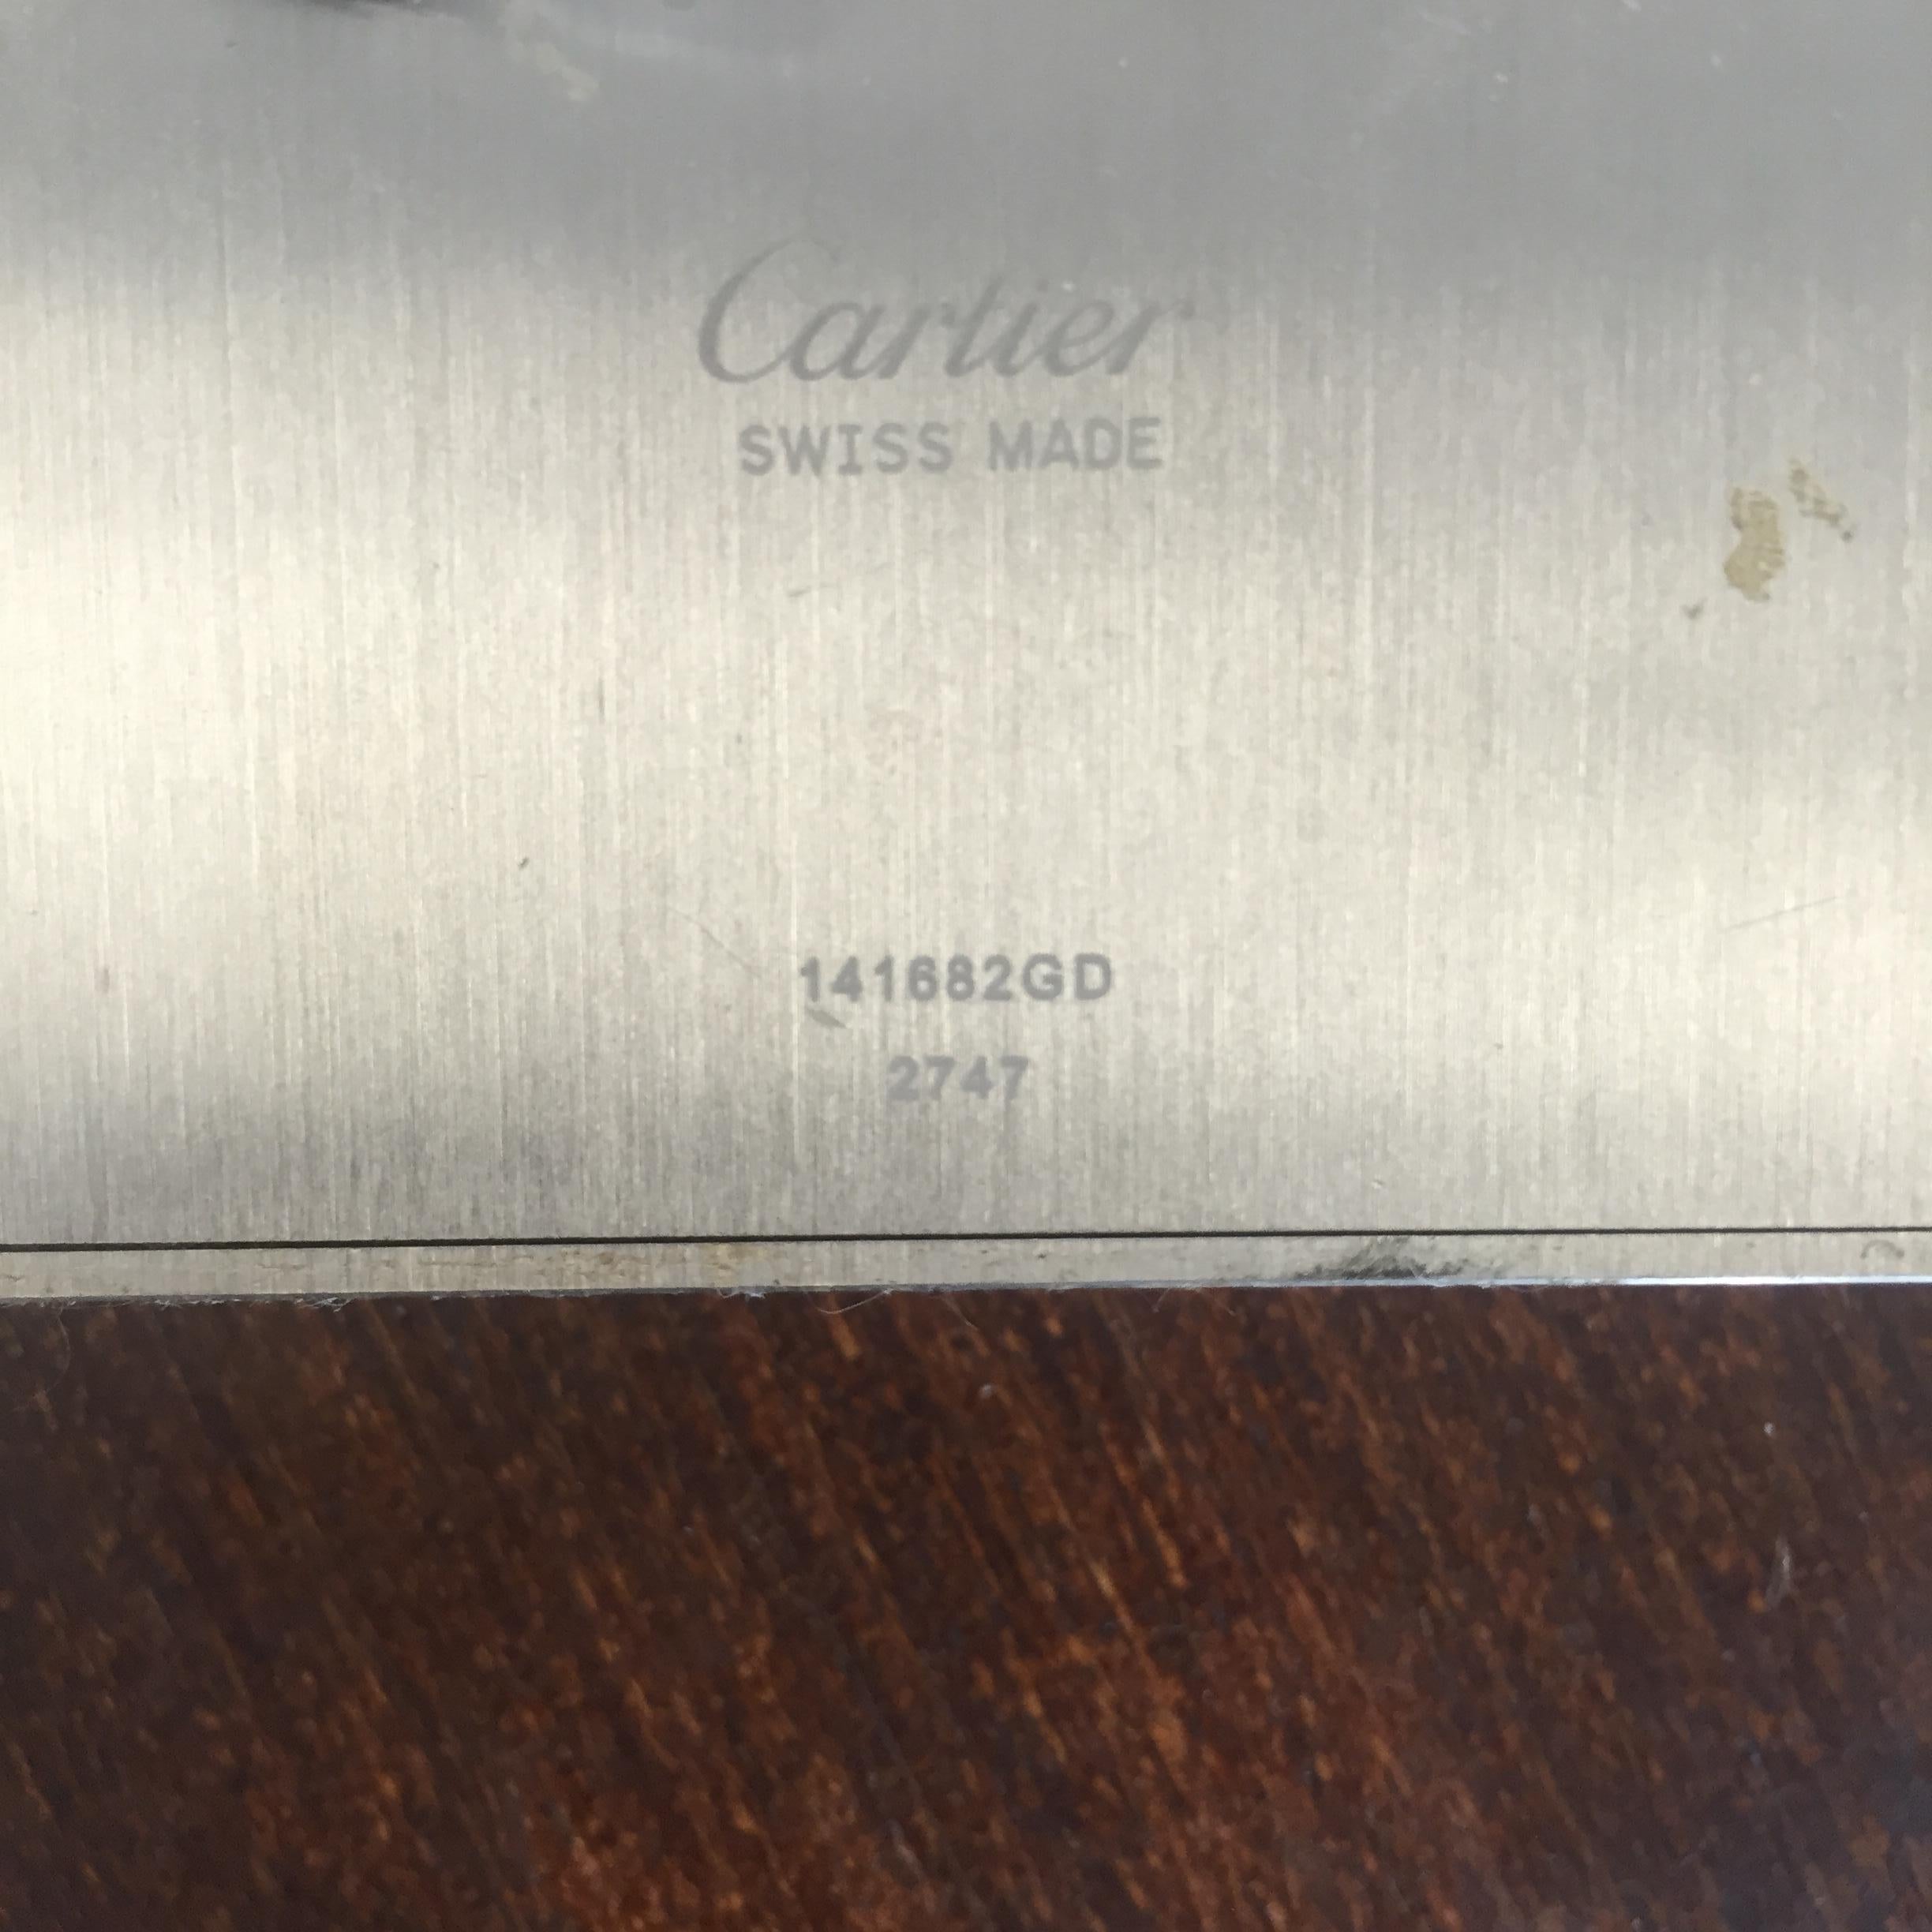 Cartier Stainless Steel Travel Desk Clock with Alarm and Wood Detail In Good Condition For Sale In West Hollywood, CA